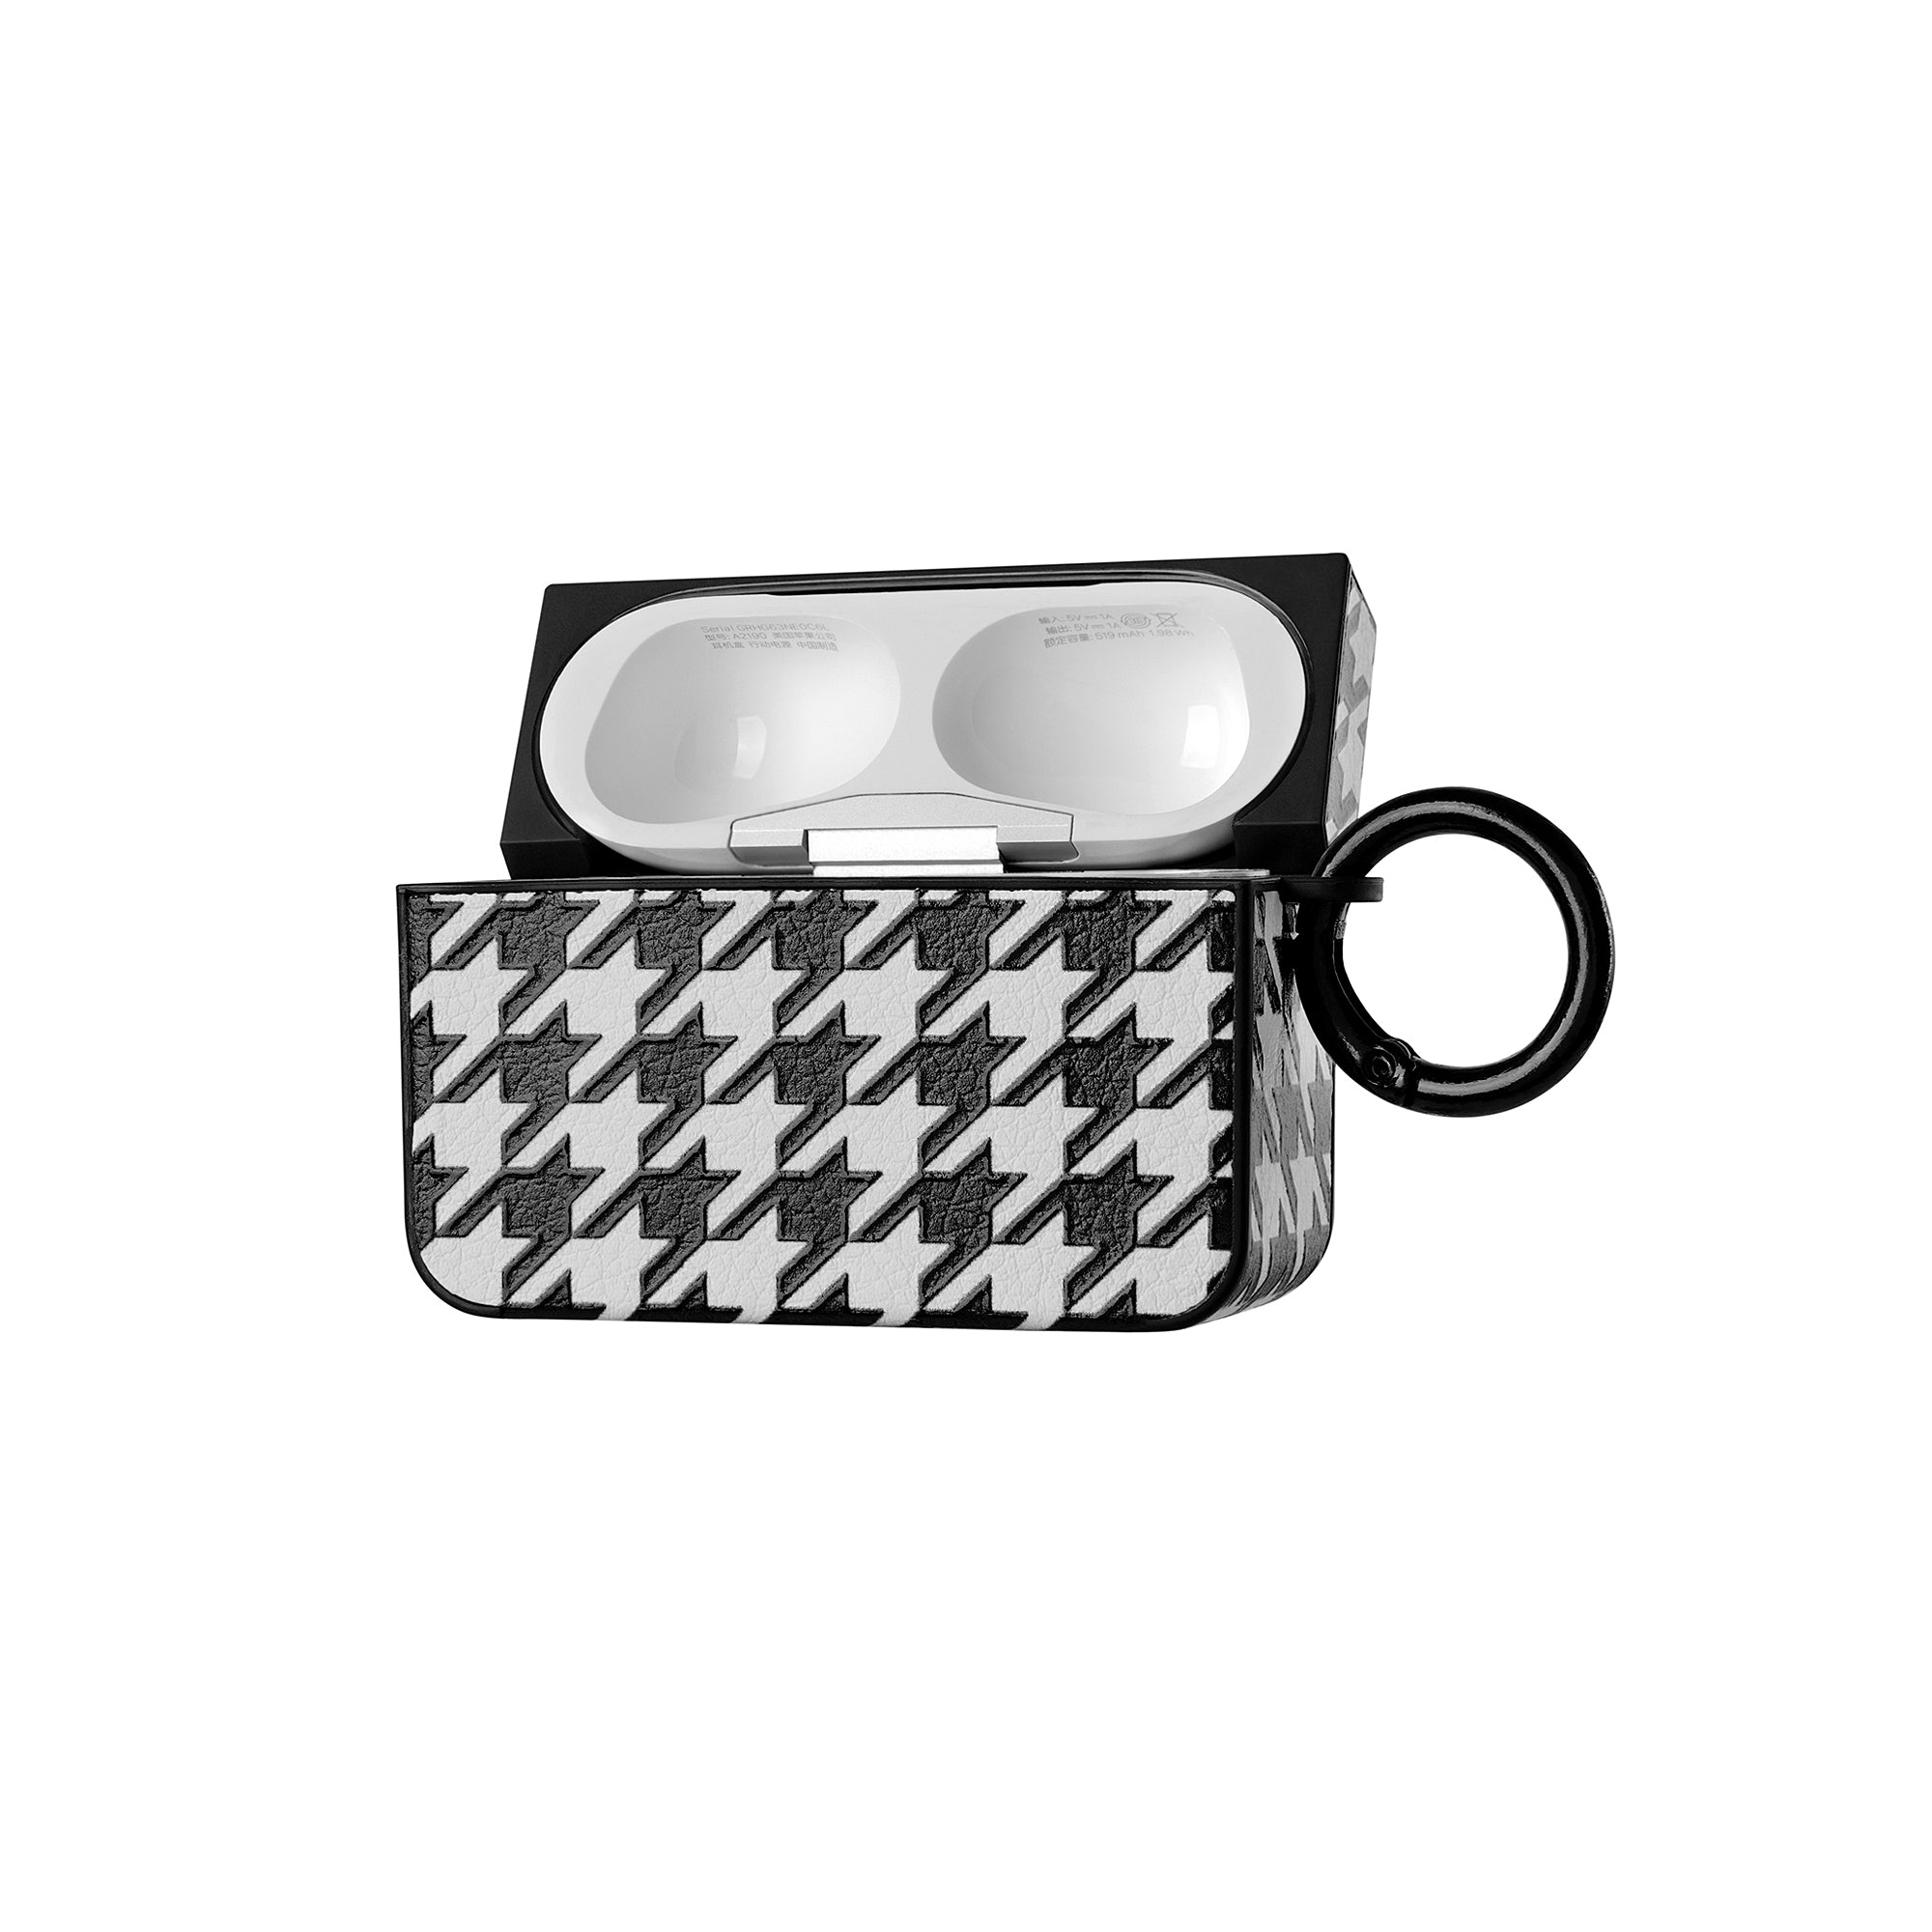 Houndstooth AirPods Case